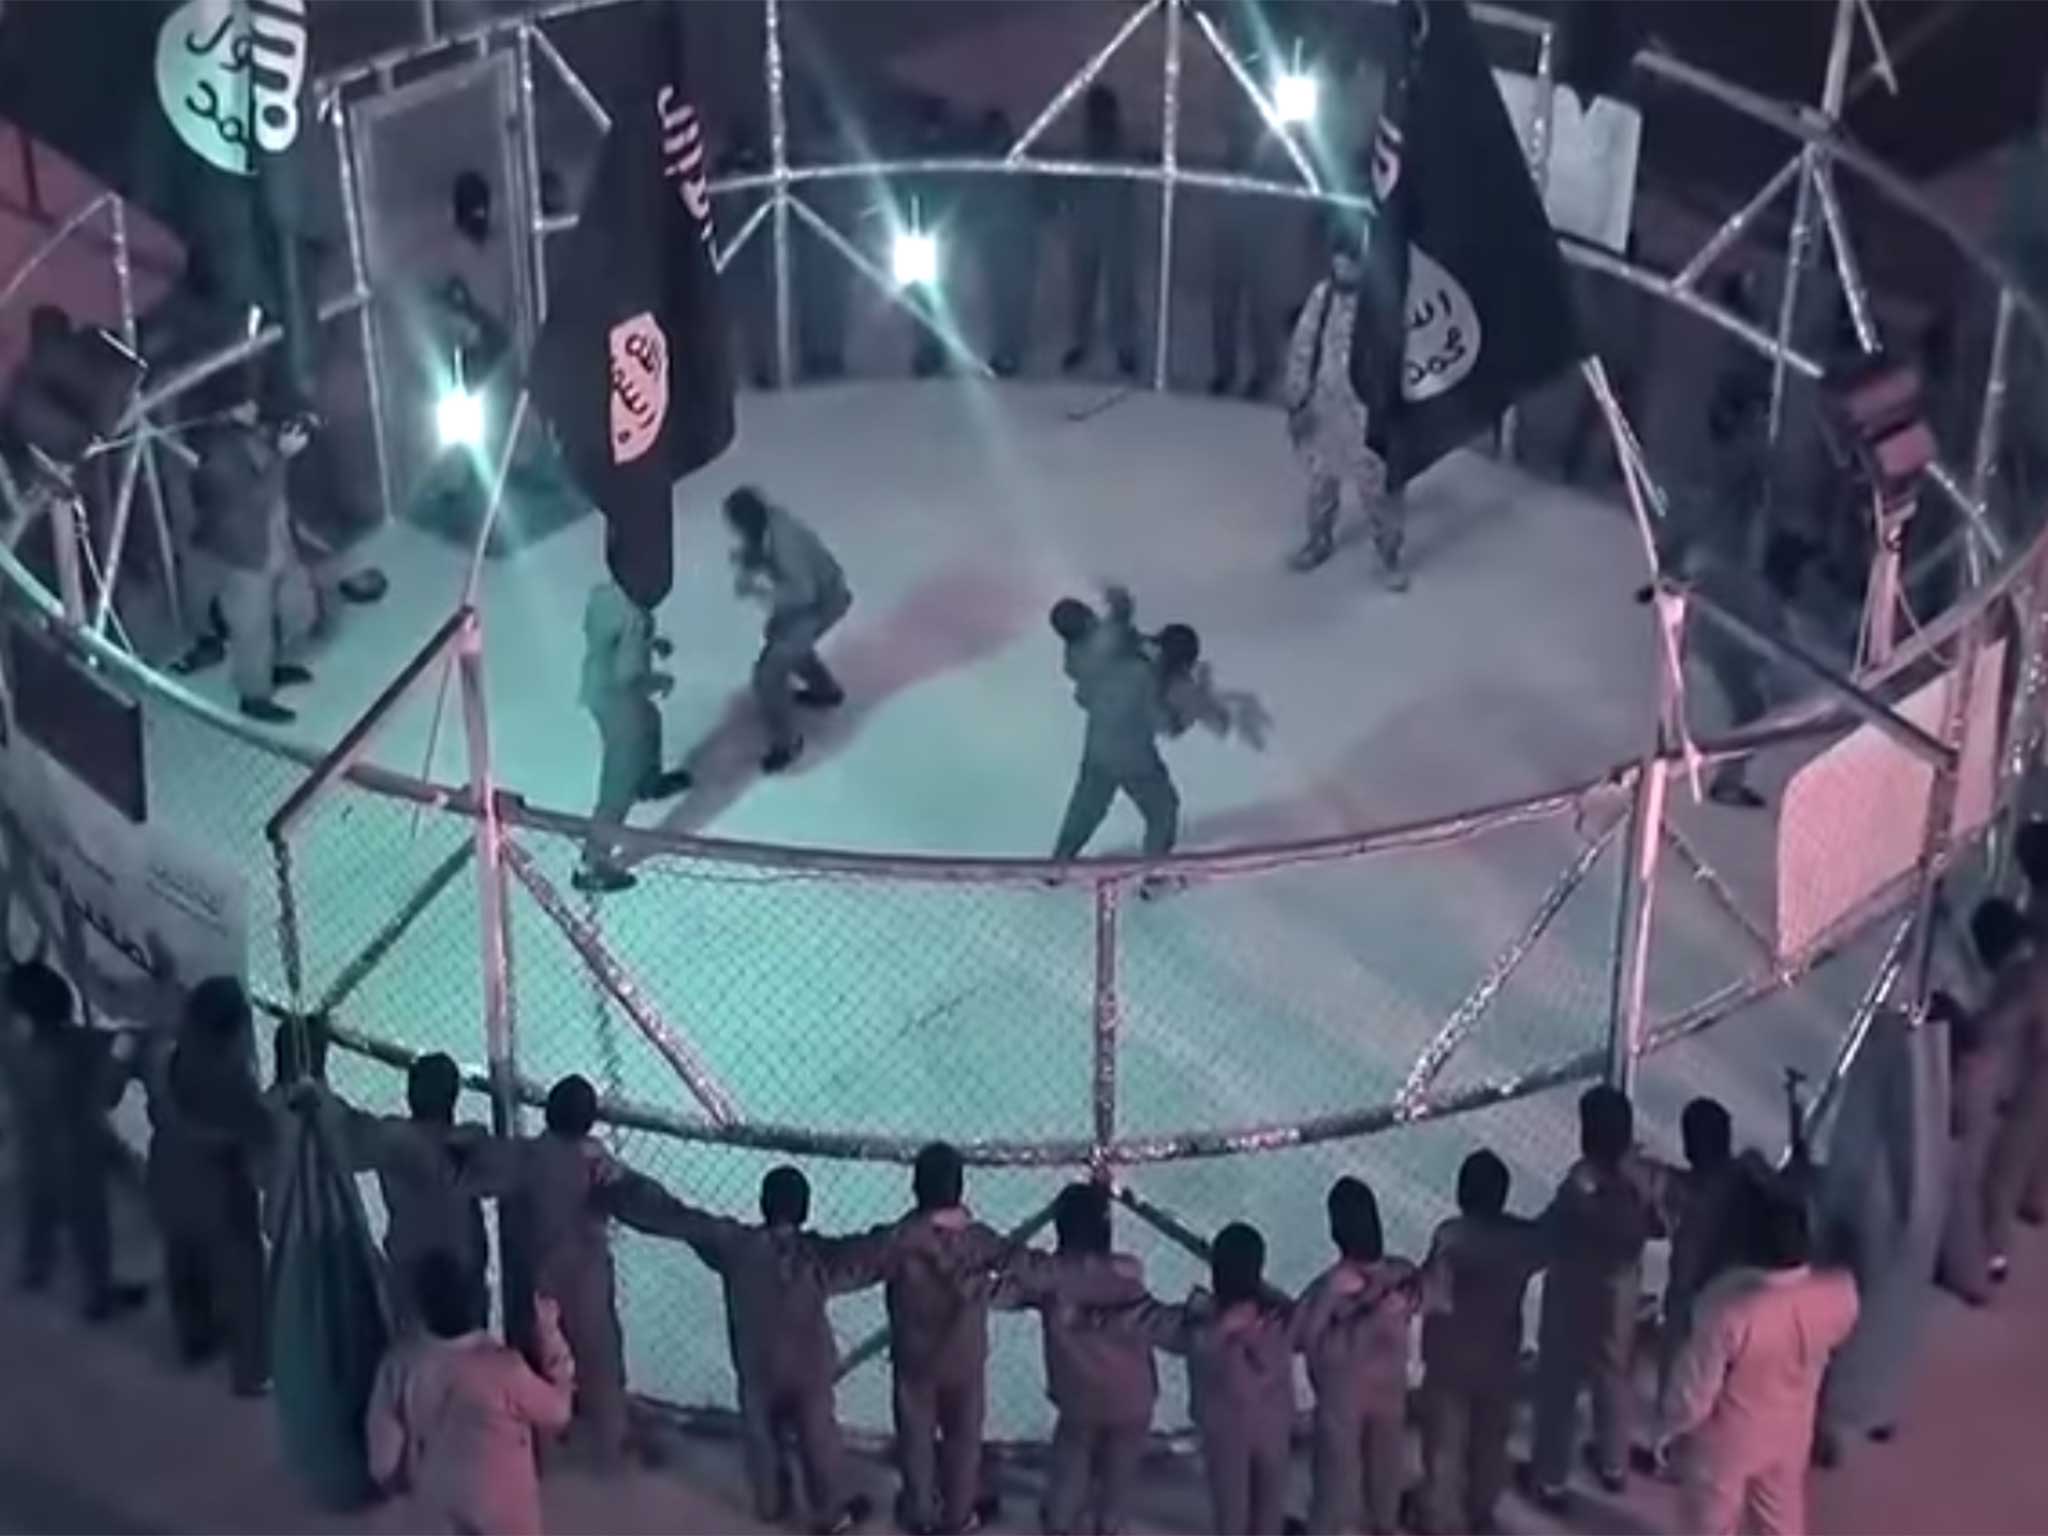 The video shows young boys fighting under the direction of an older militant